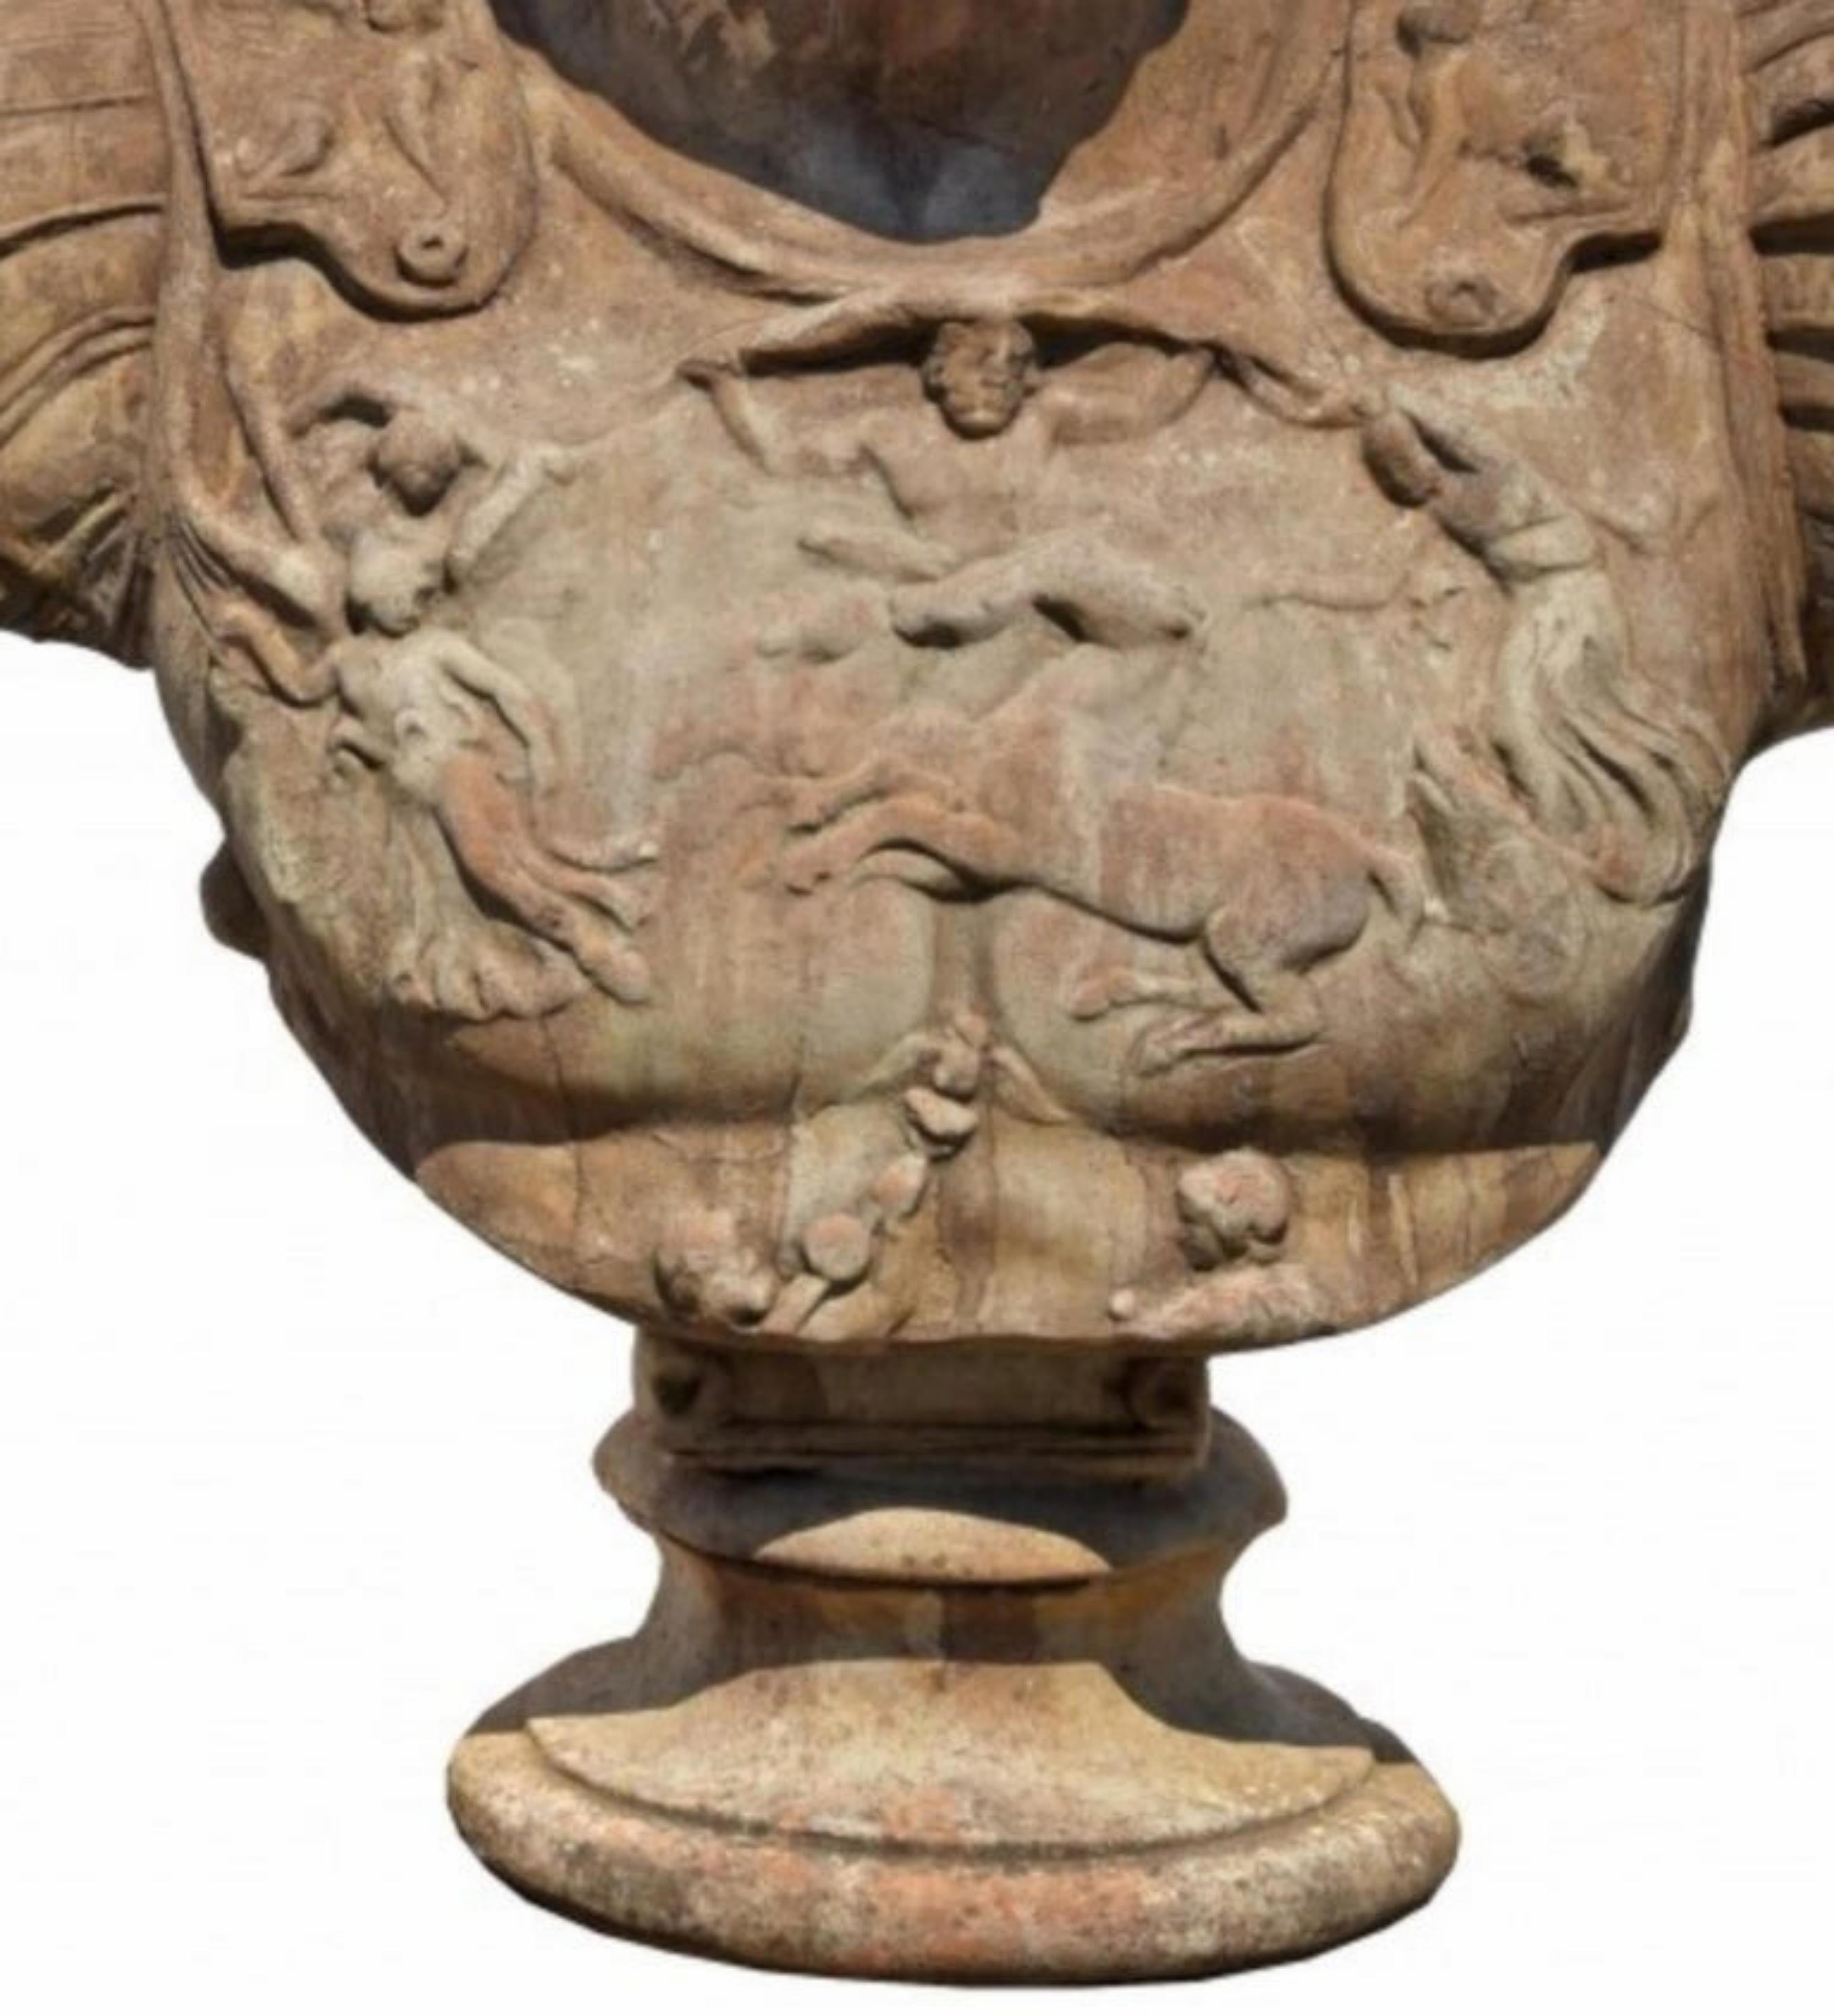 Cesare Ottaviano Augusto bust in terracotta.
Italian School, early 20th century.
Measures: height 60 cm
Width 40 cm
Depth 20 cm
Weight 18 kg
Material terracotta.